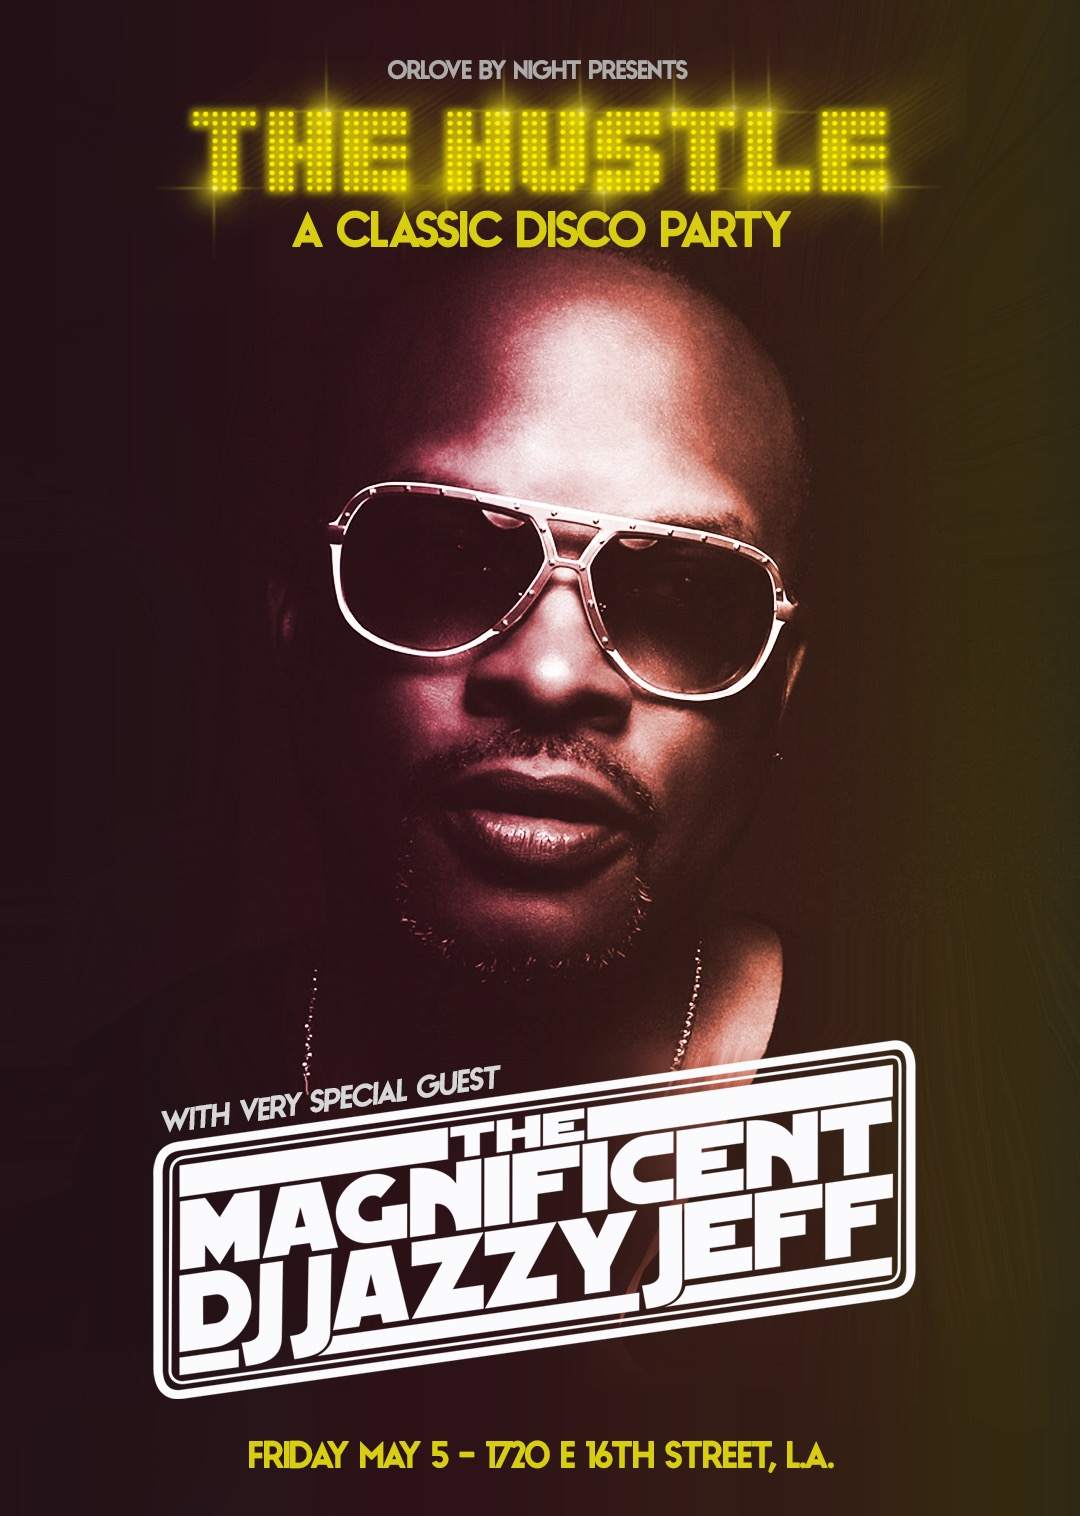 DJ Jazzy Jeff at The Hustle: A Classic Disco Party - Página frontal